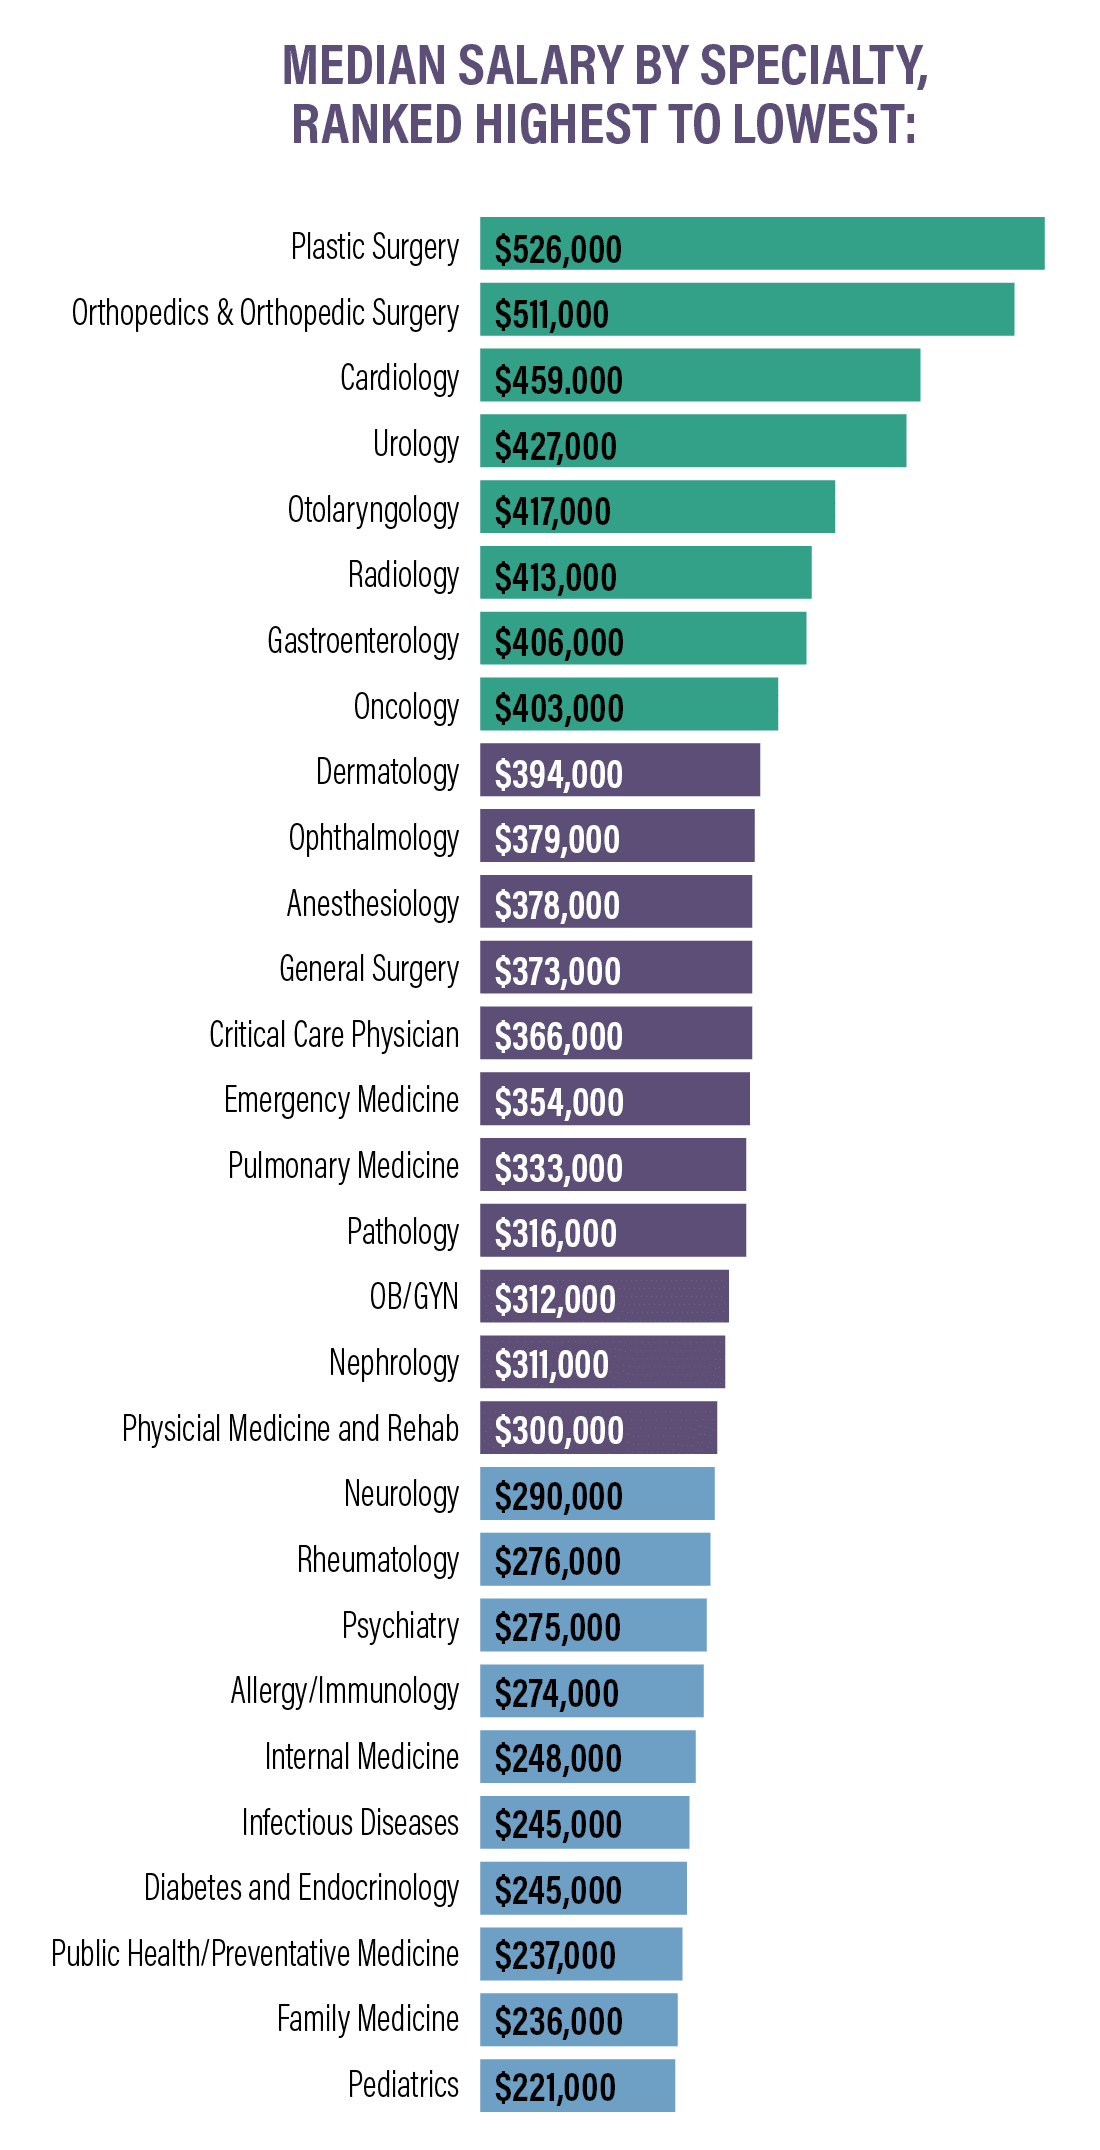 median-salary-by-spec-p7-1-1.png